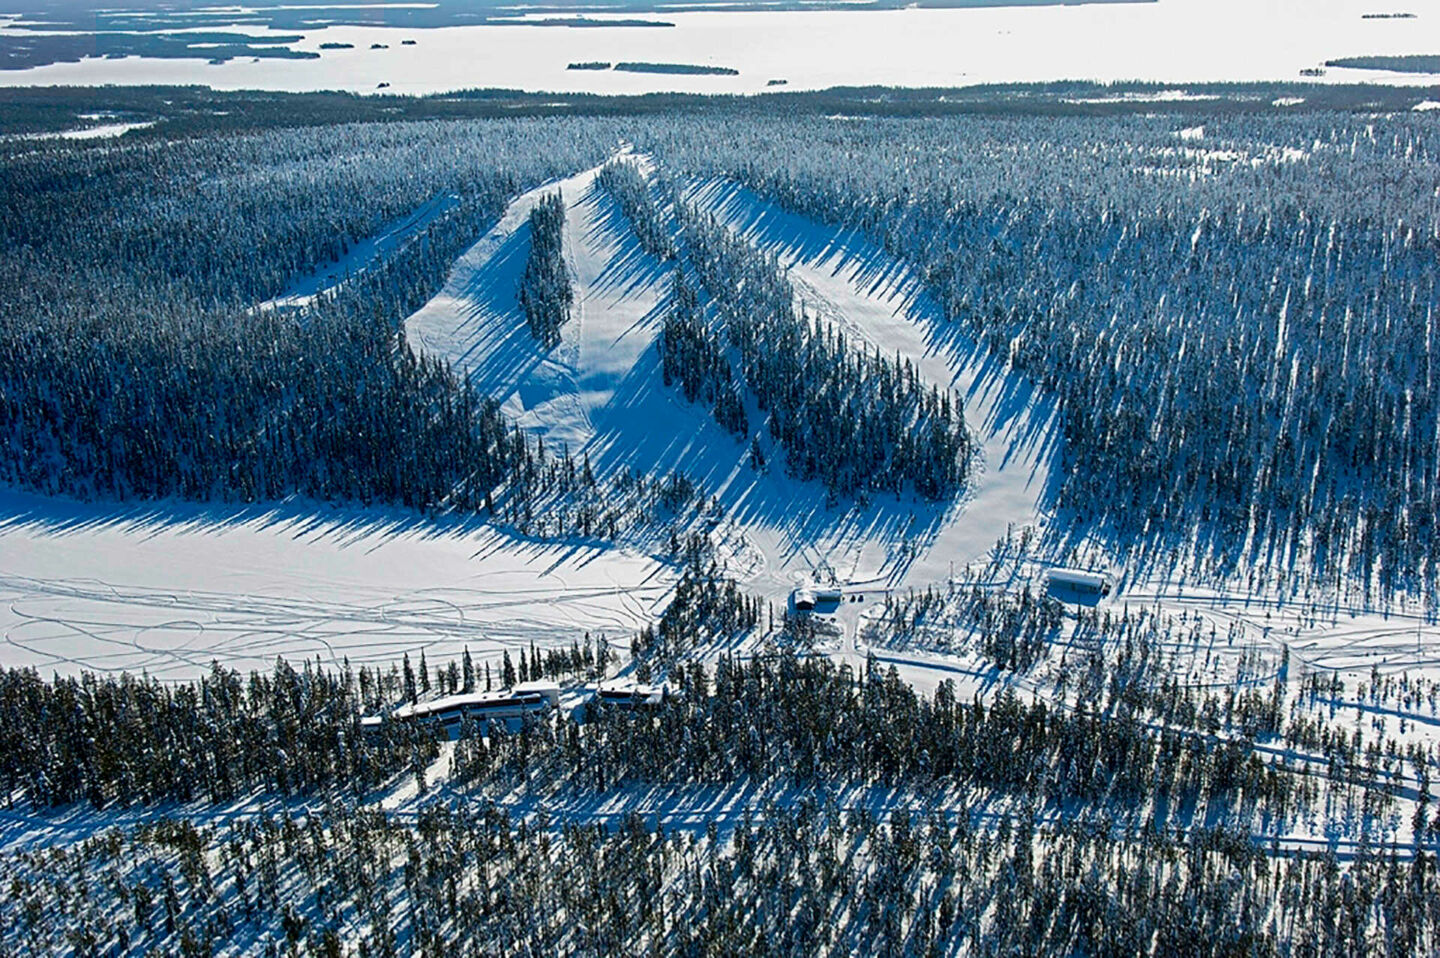 The slopes of the Kirintovaara ski center in winter in Posio, a Finnish Lapland filming location